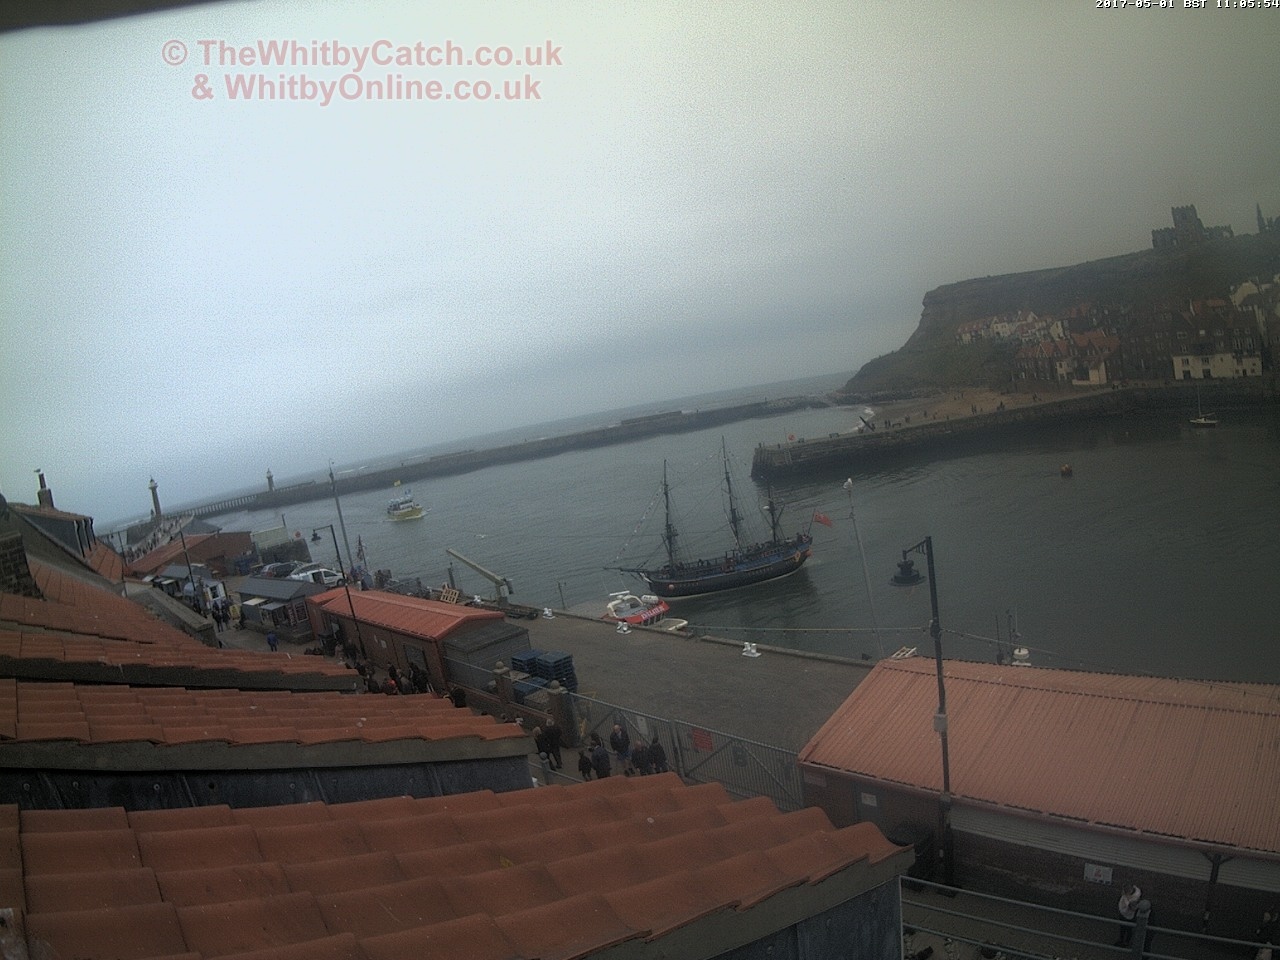 Whitby Mon 1st May 2017 11:06.